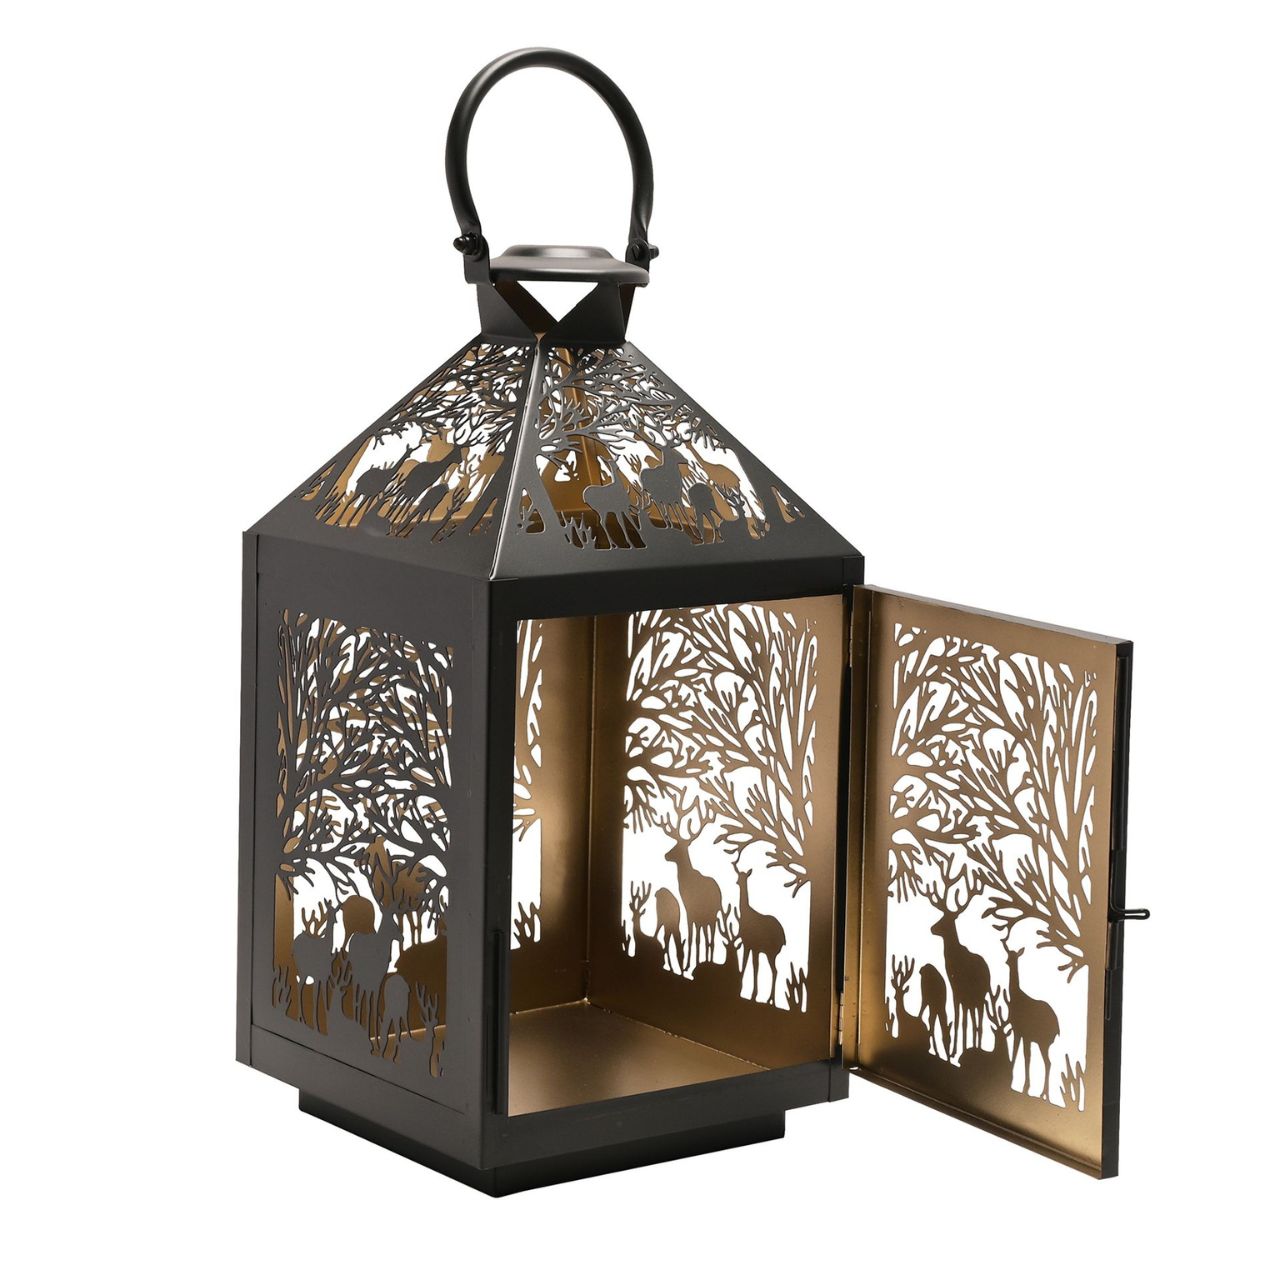 Stag Silhouette Christmas Lantern Square  A square stag silhouette lantern.  This enchanting lantern glistens with festive charm throughout the Christmas period.